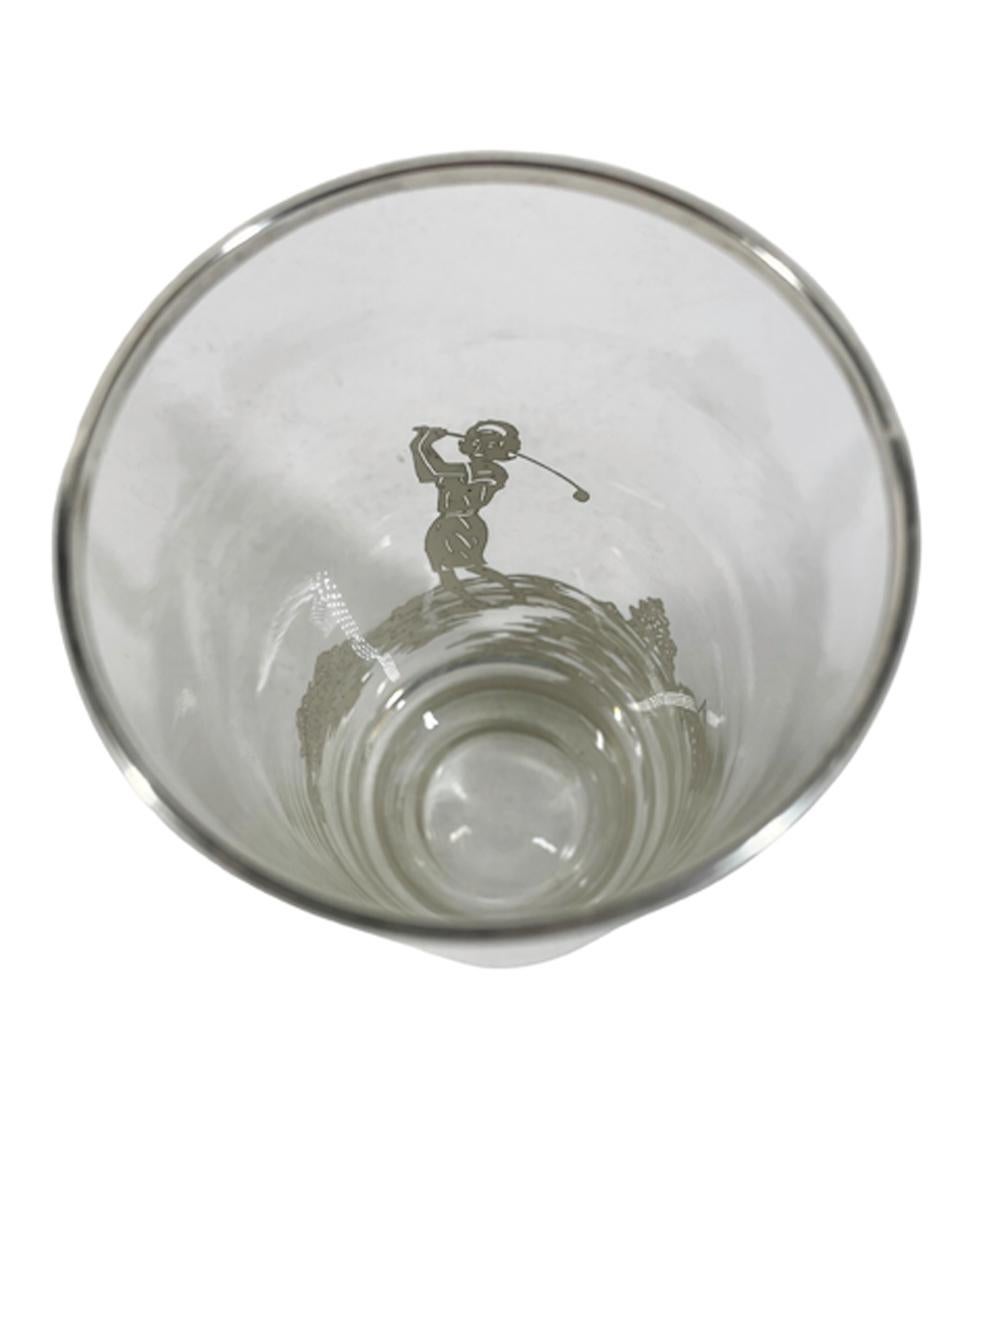 Four Art Deco Silver Overlay Golf Theme Highball Glasses with a Woman Golfer In Good Condition For Sale In Nantucket, MA